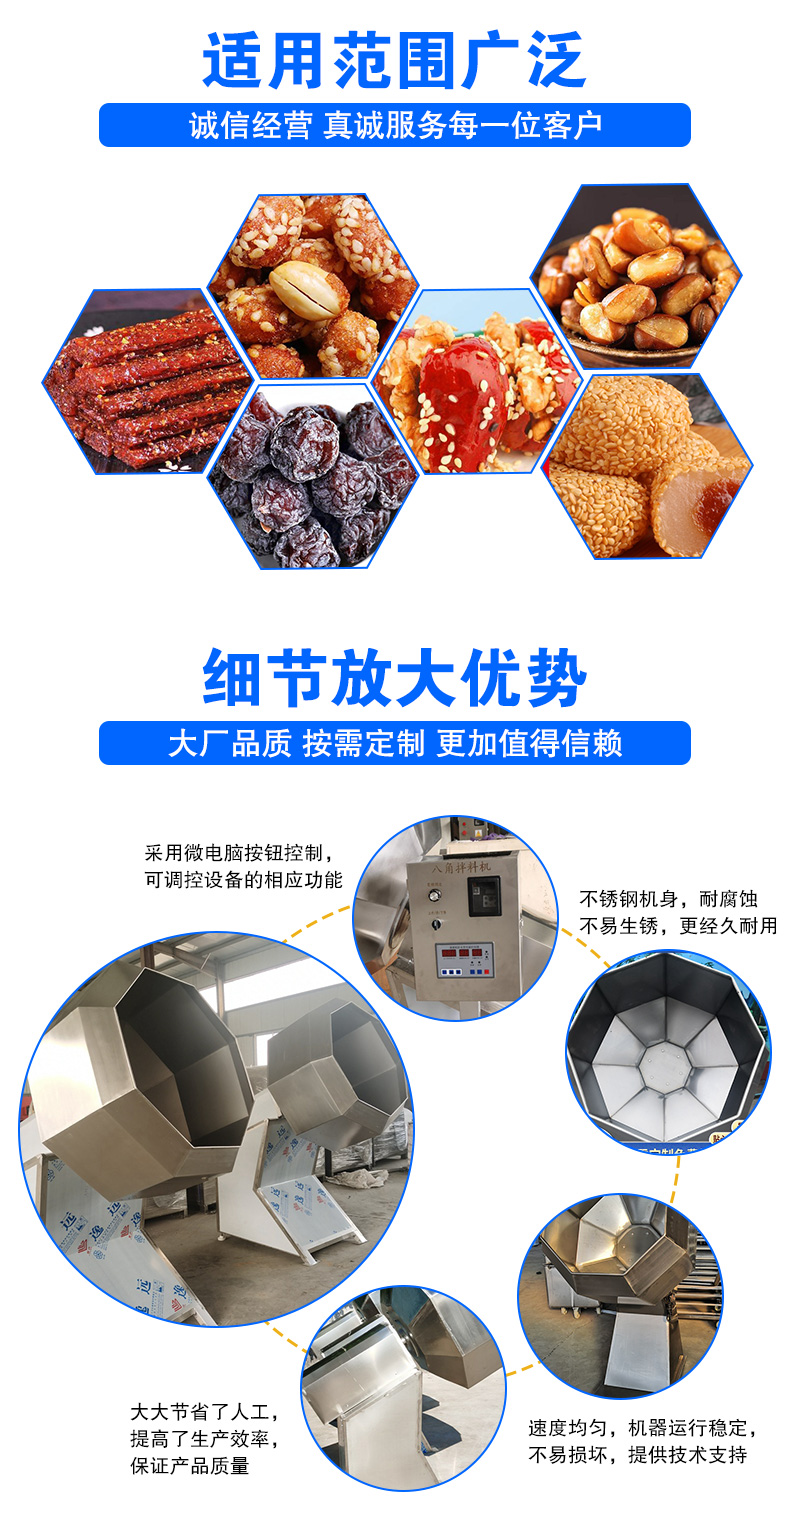 Qihong Meat Expanded Food Mixer Fully Automatic Spicy Bar Seasoning Machine Commercial Octagon Mixer